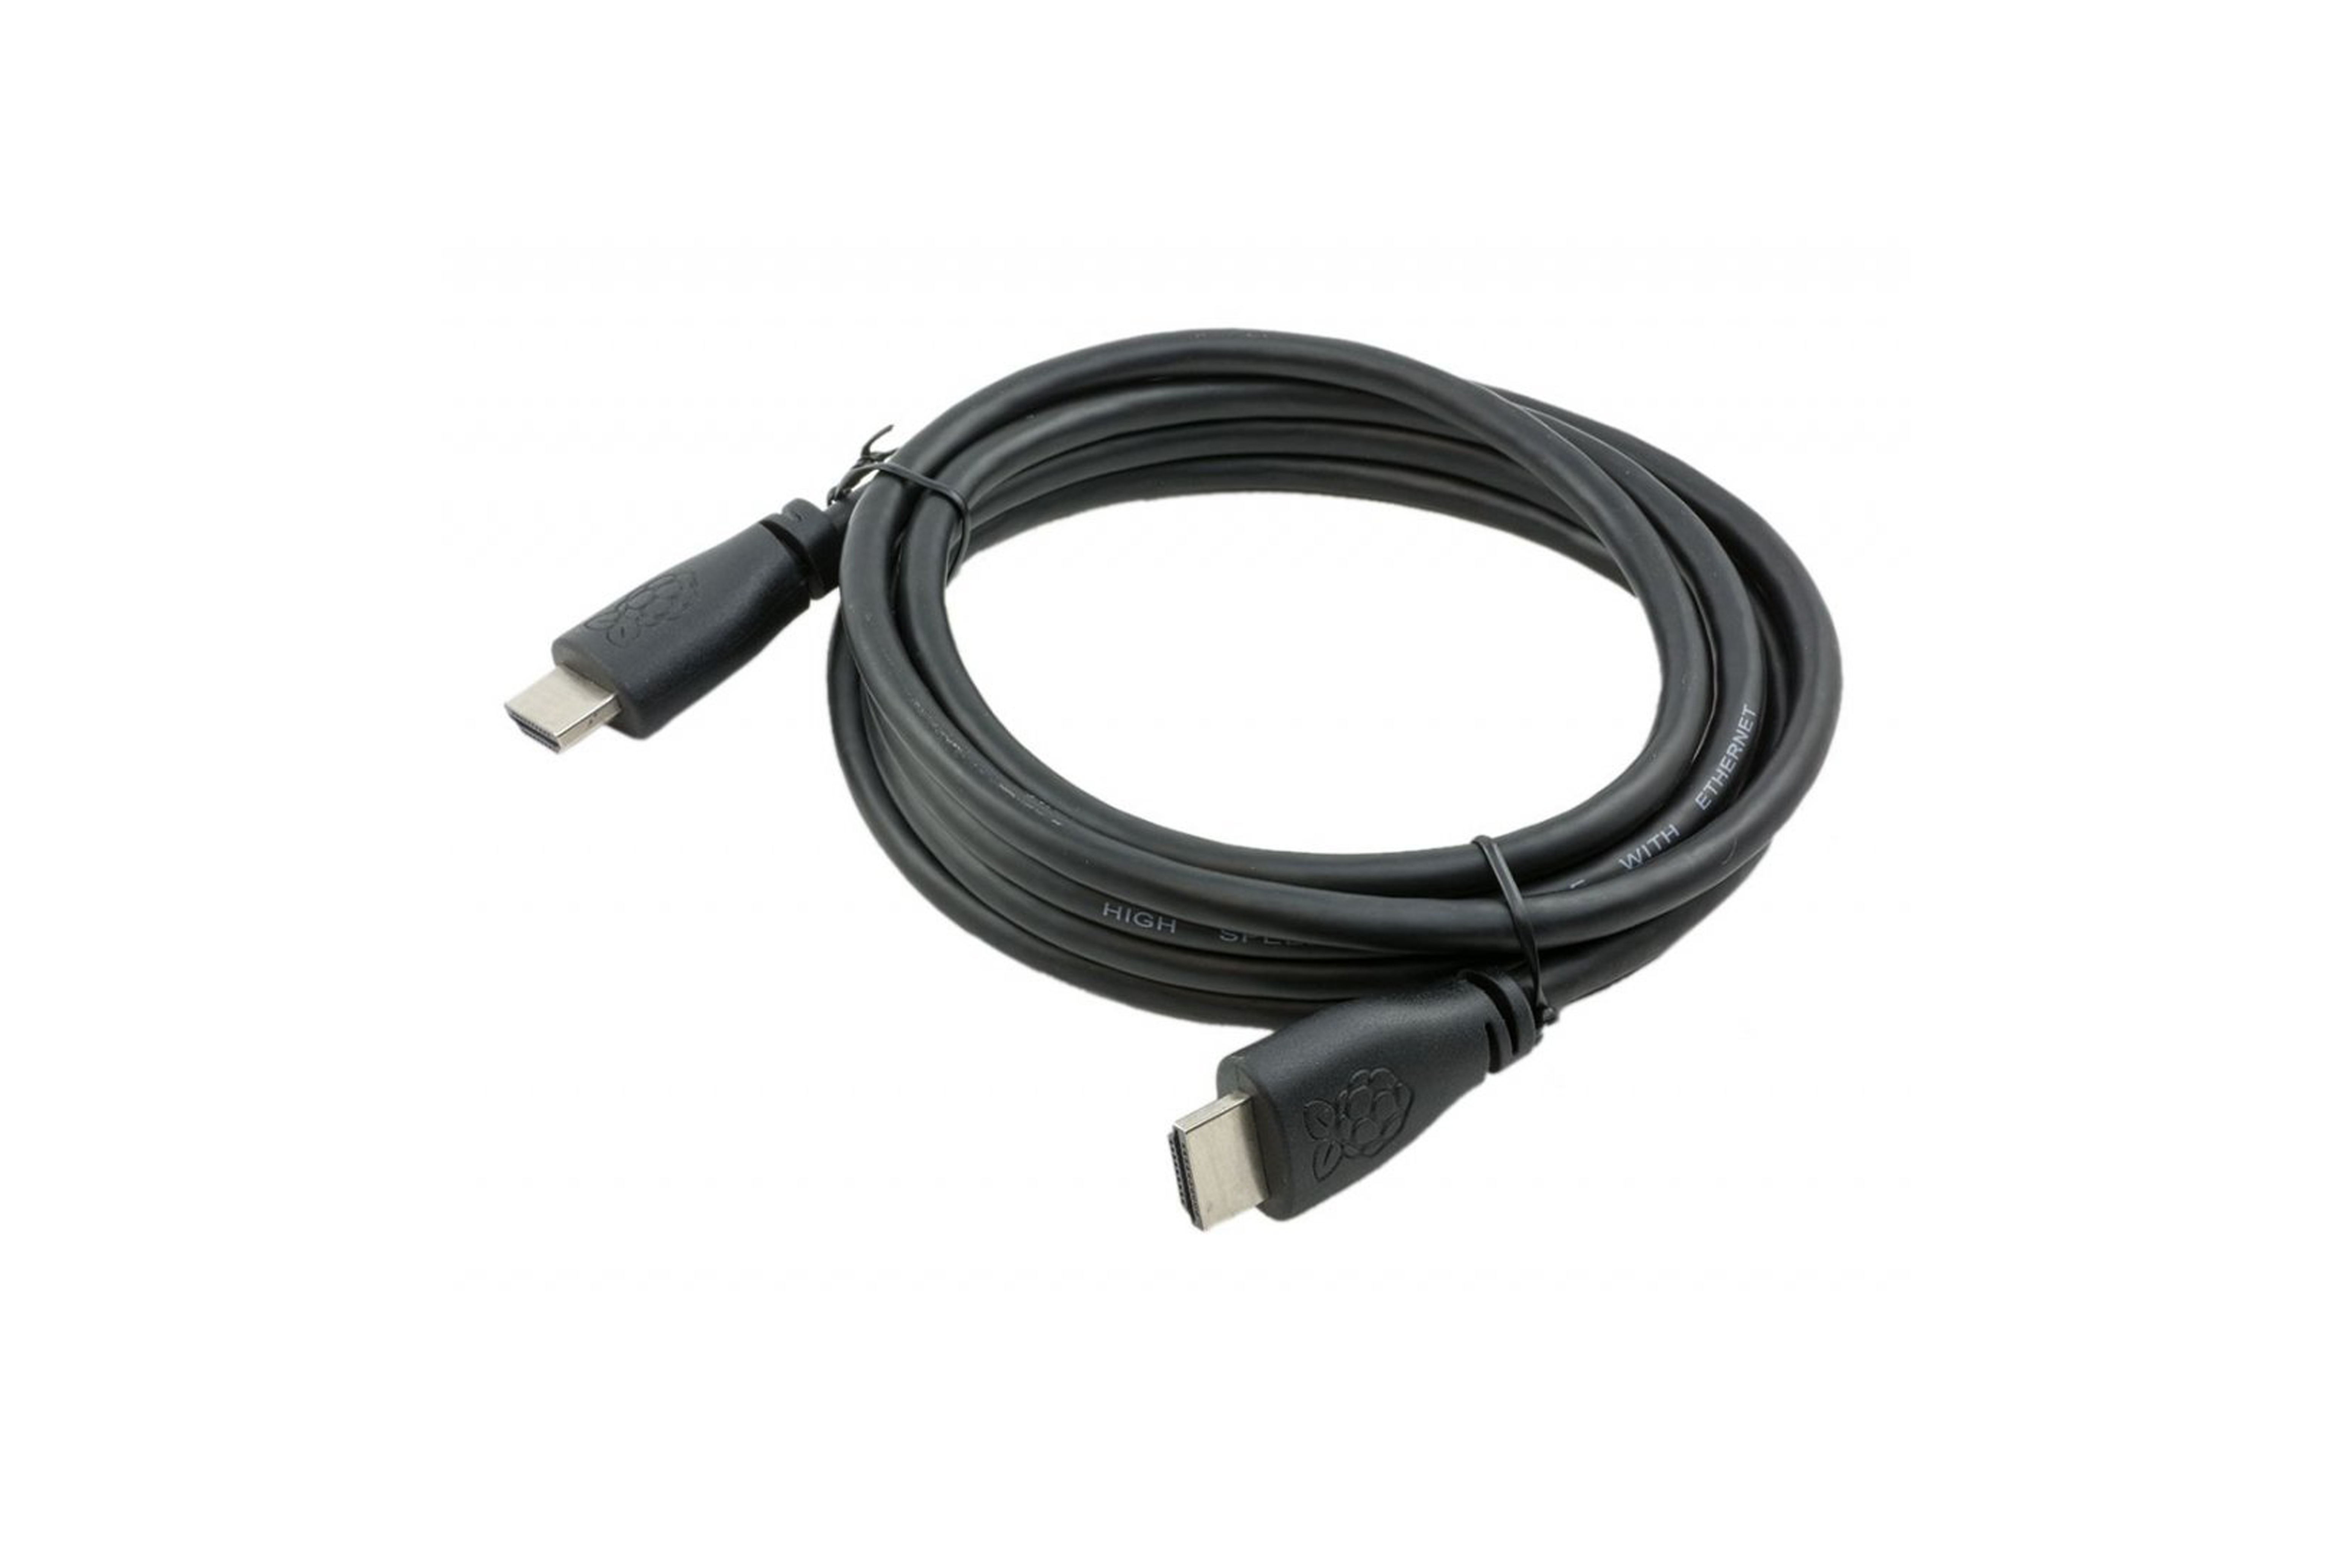 Official Raspberry Pi HDMI Cable - Black 2M